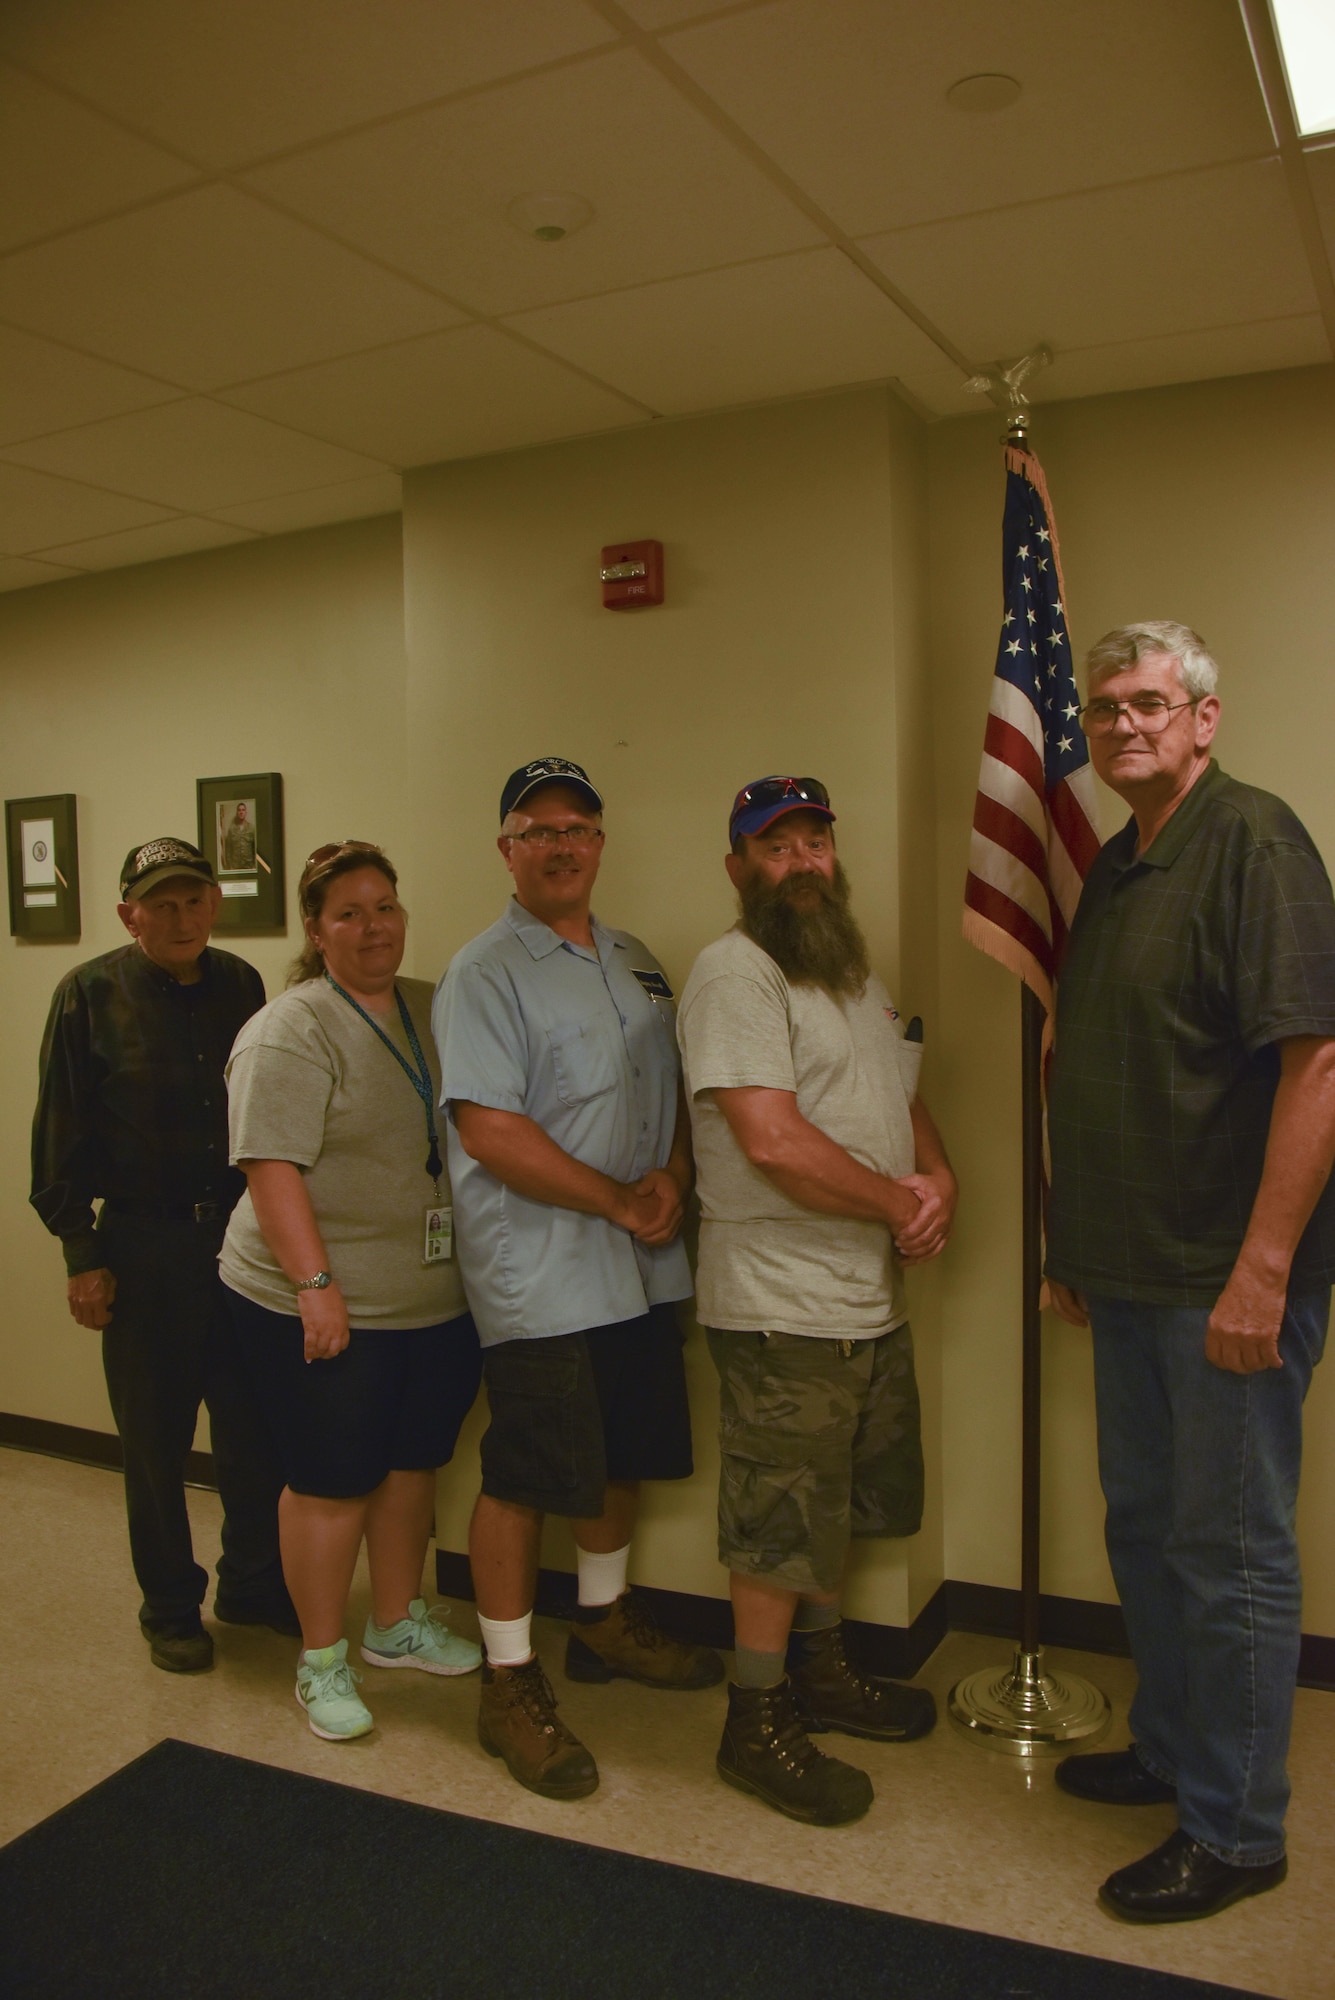 George Kelly, vehicle maintenance manager, stands with friends during his retirement party at the Pittsburgh International Air Reserve Station, Pennsylvania, July 26, 2016. Kelly’s future plans include relaxing and traveling the country. (U.S. Air Force courtesy photo by Ashley Podrasky)